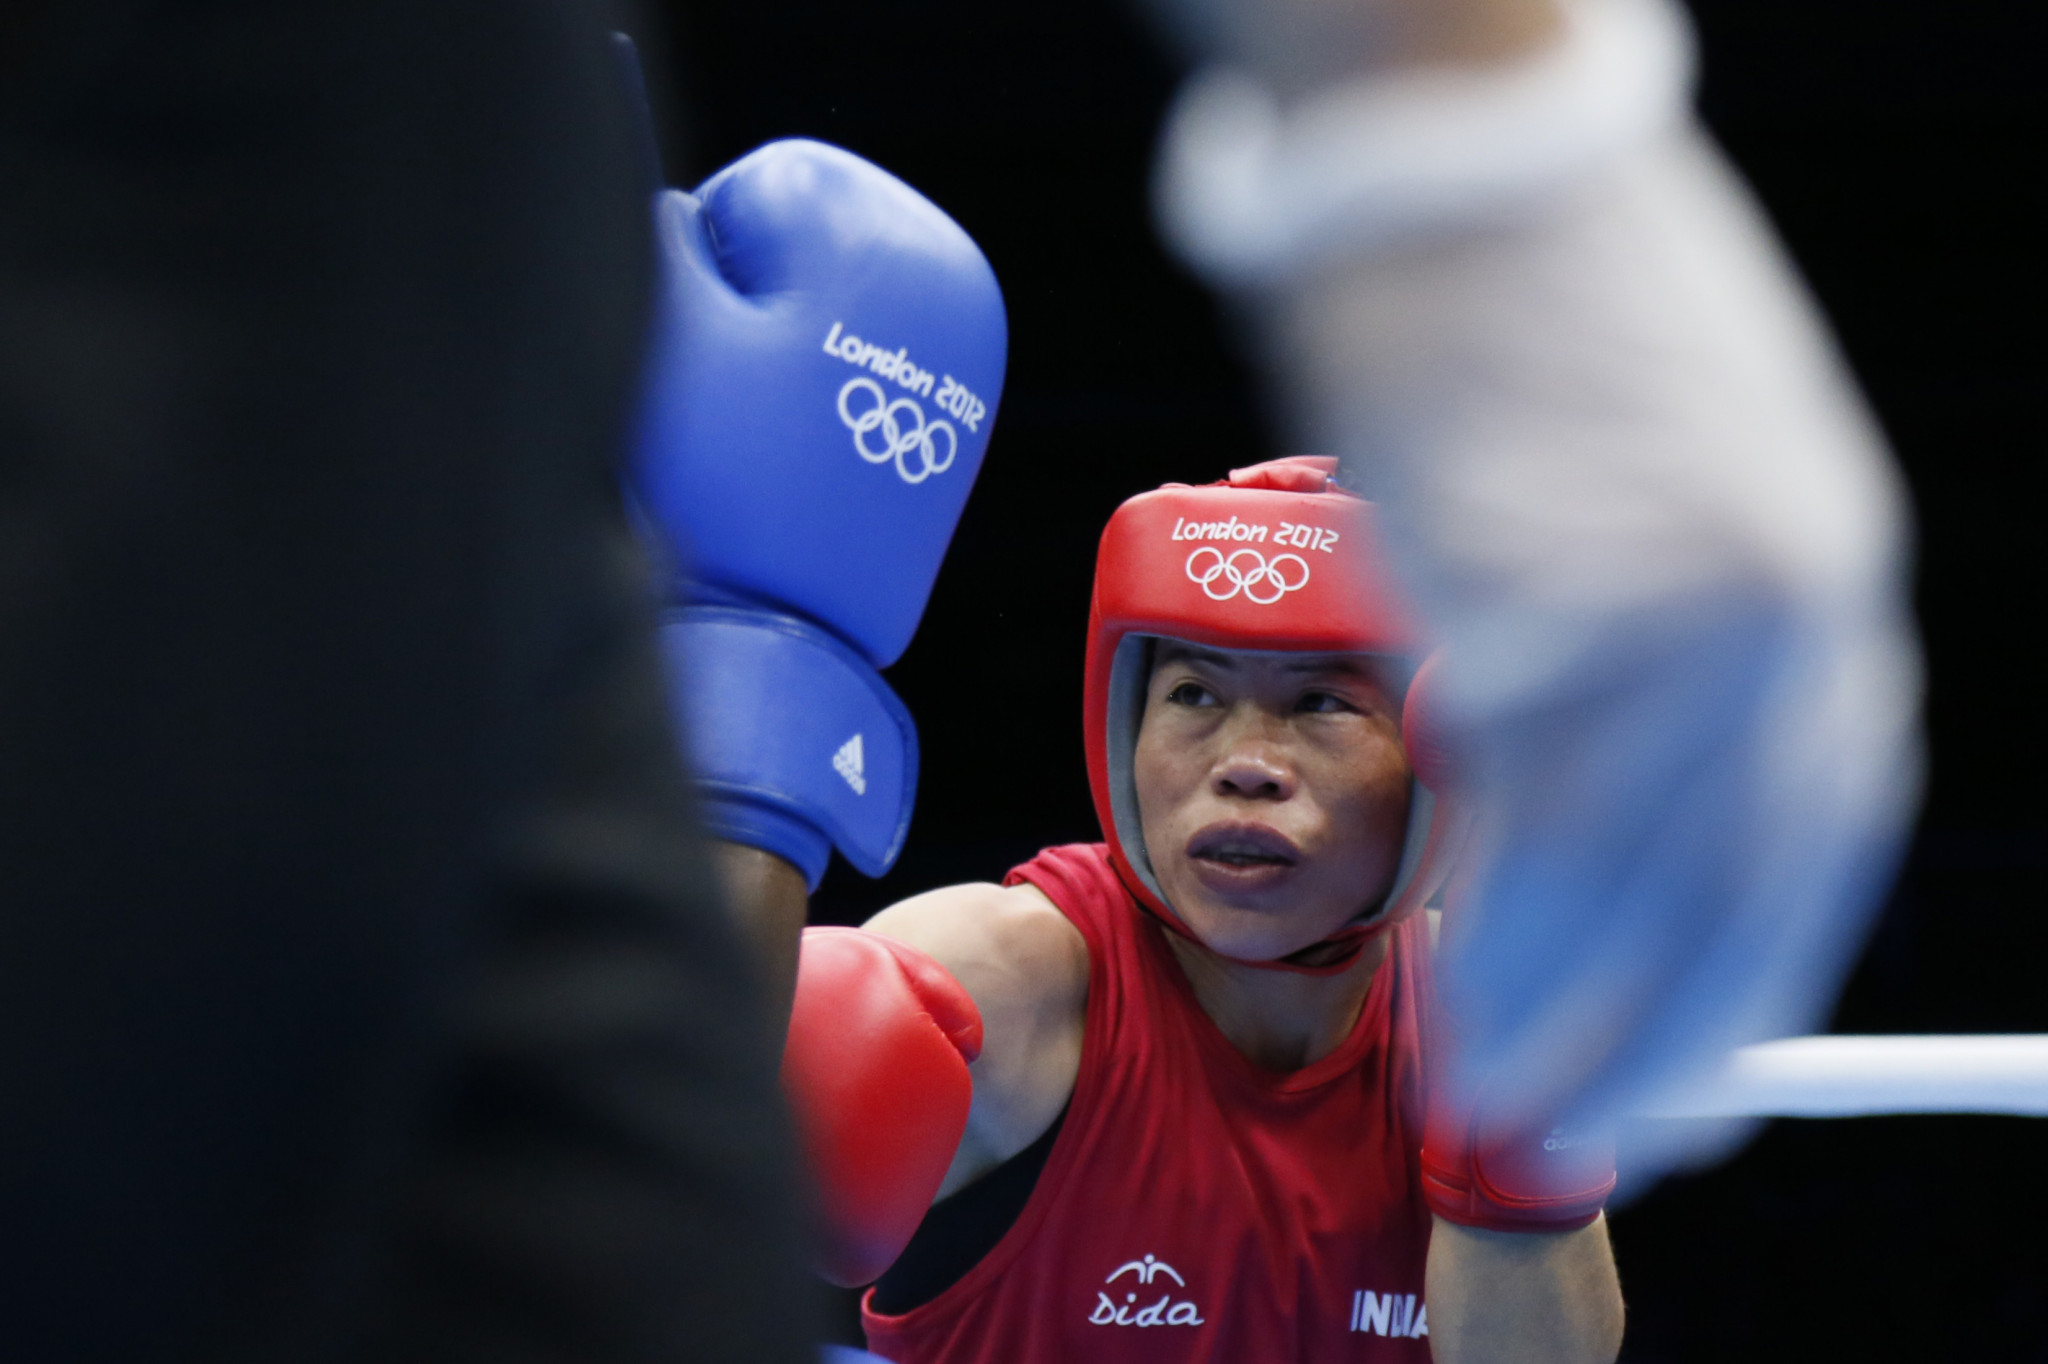 London 2012 bronze medallist and six-time world champion Mary Kom has also qualified for Tokyo 2020 ©Getty Images